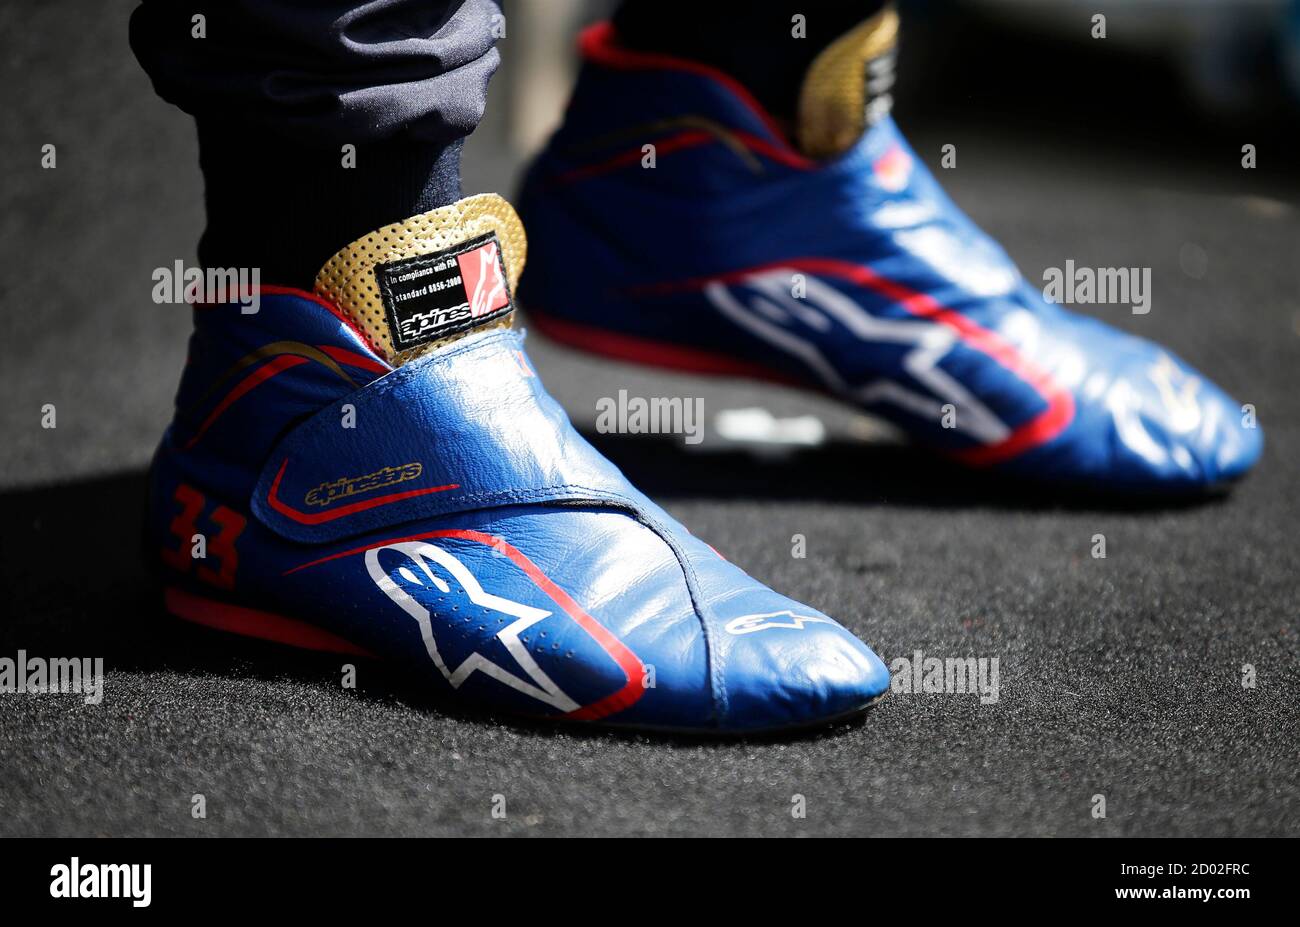 The racing boots of Toro Rosso Formula One driver Max Verstappen of the  Netherlands is seen during a photo session before the Australia Formula One  Grand Prix, at Melbourne's Albert Park Track,